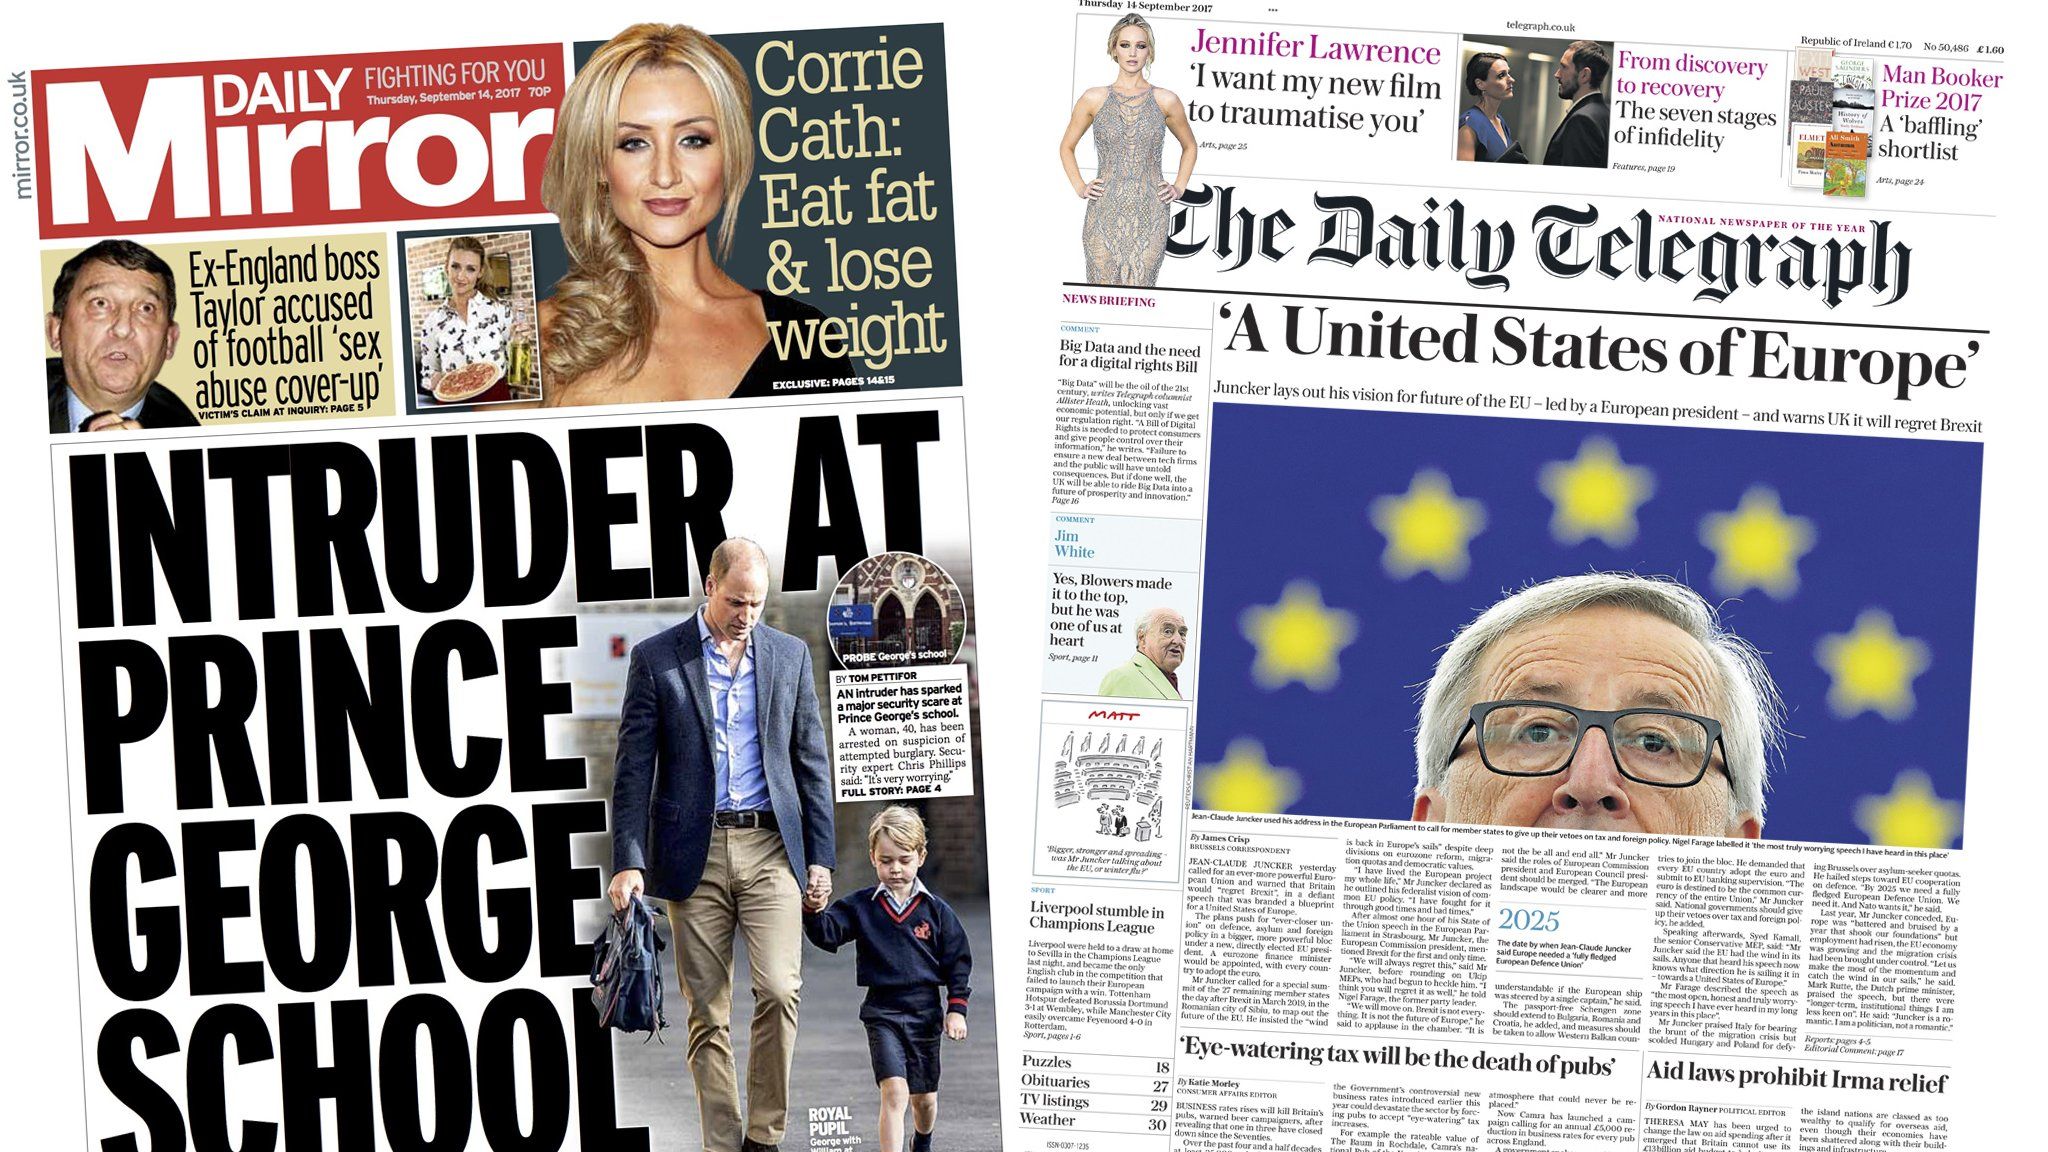 Daily Mirror and Telegraph front pages